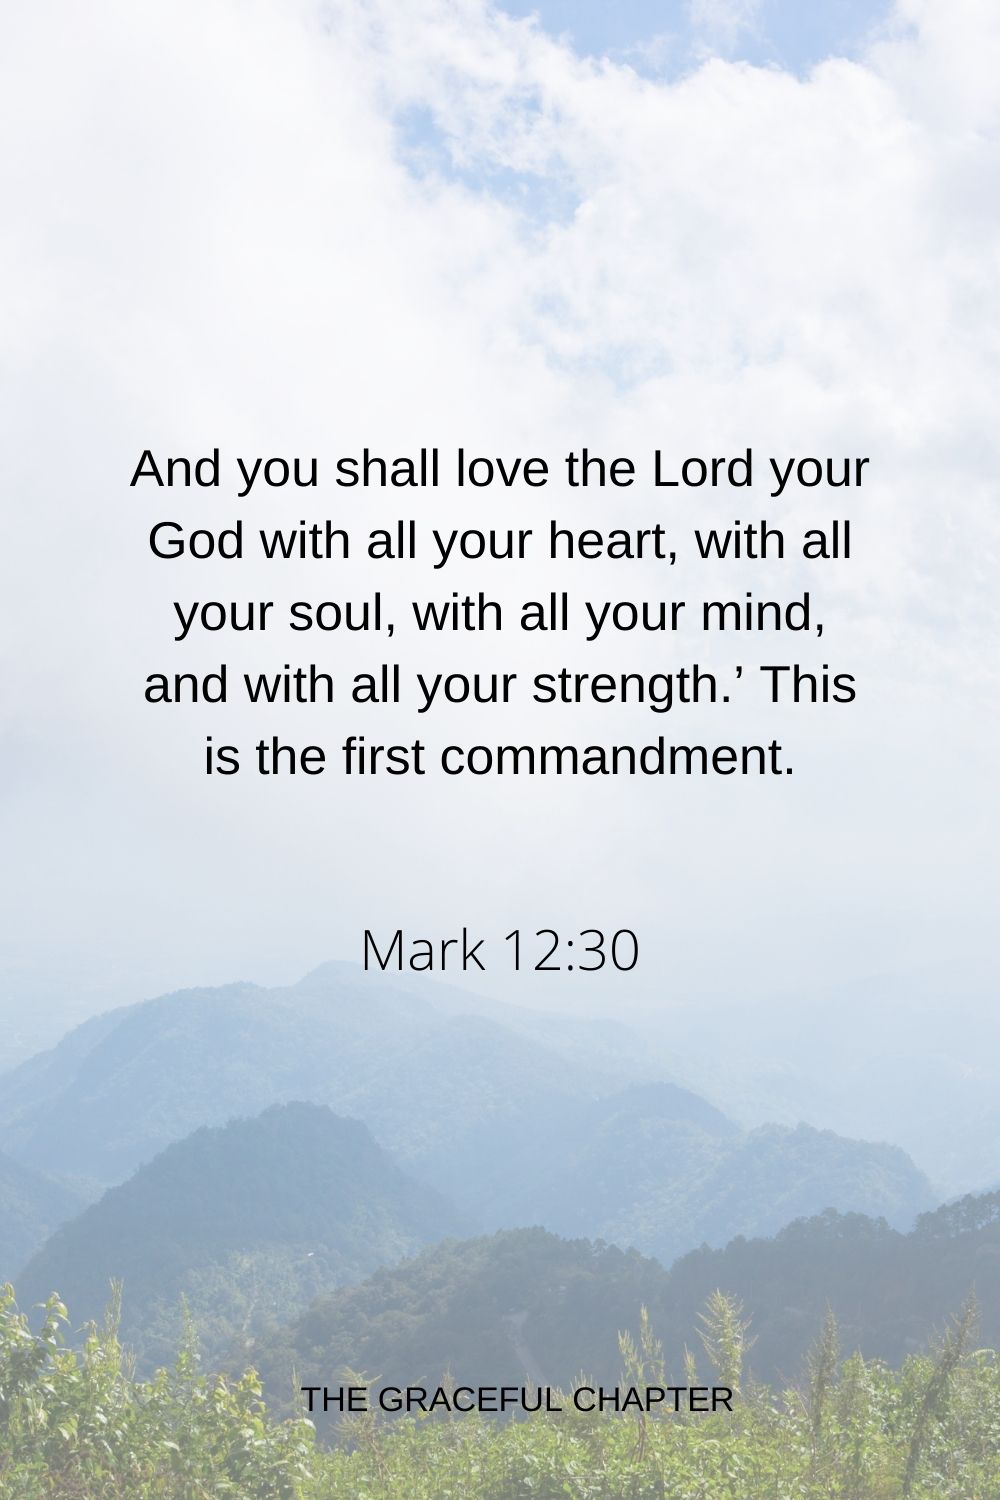 And you shall love the Lord your God with all your heart, with all your soul, with all your mind, and with all your strength.’ This is the first commandment. Mark 12:30